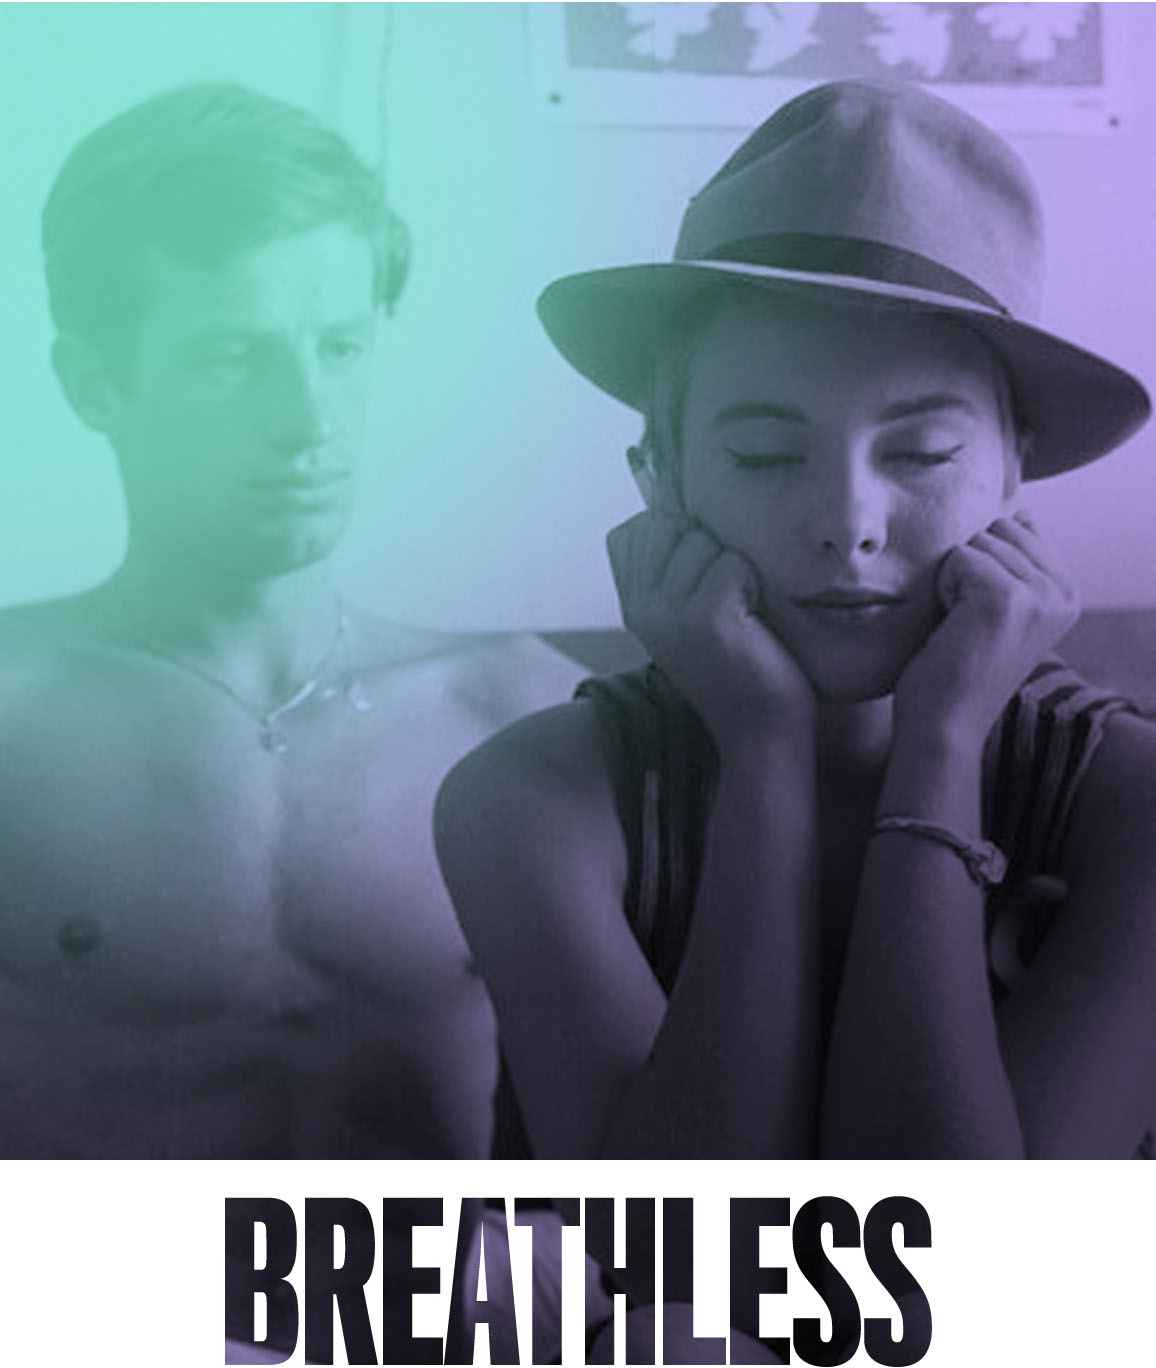 The Film Behind the Tea: Breathless